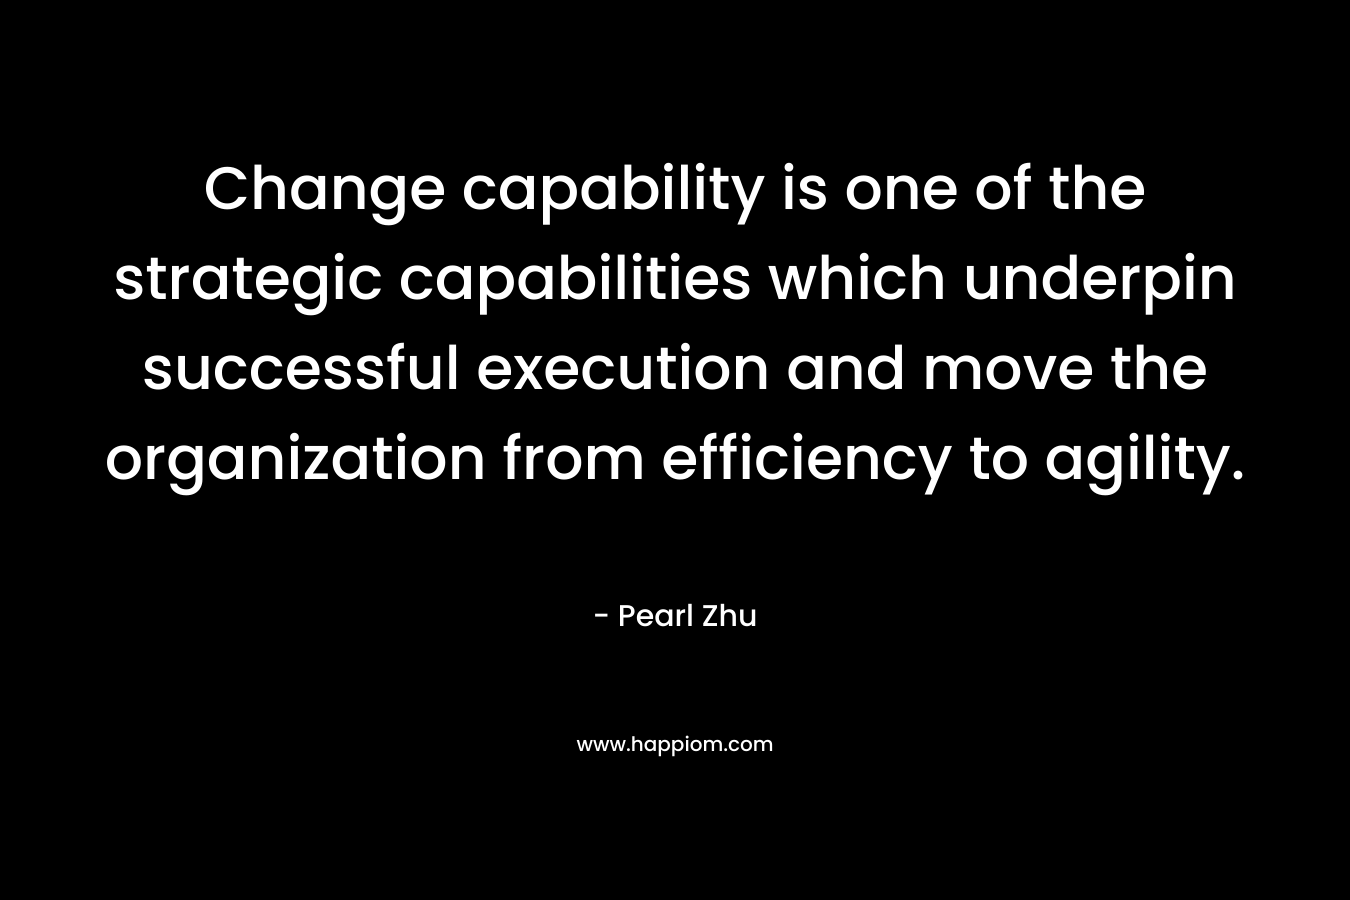 Change capability is one of the strategic capabilities which underpin successful execution and move the organization from efficiency to agility. – Pearl Zhu